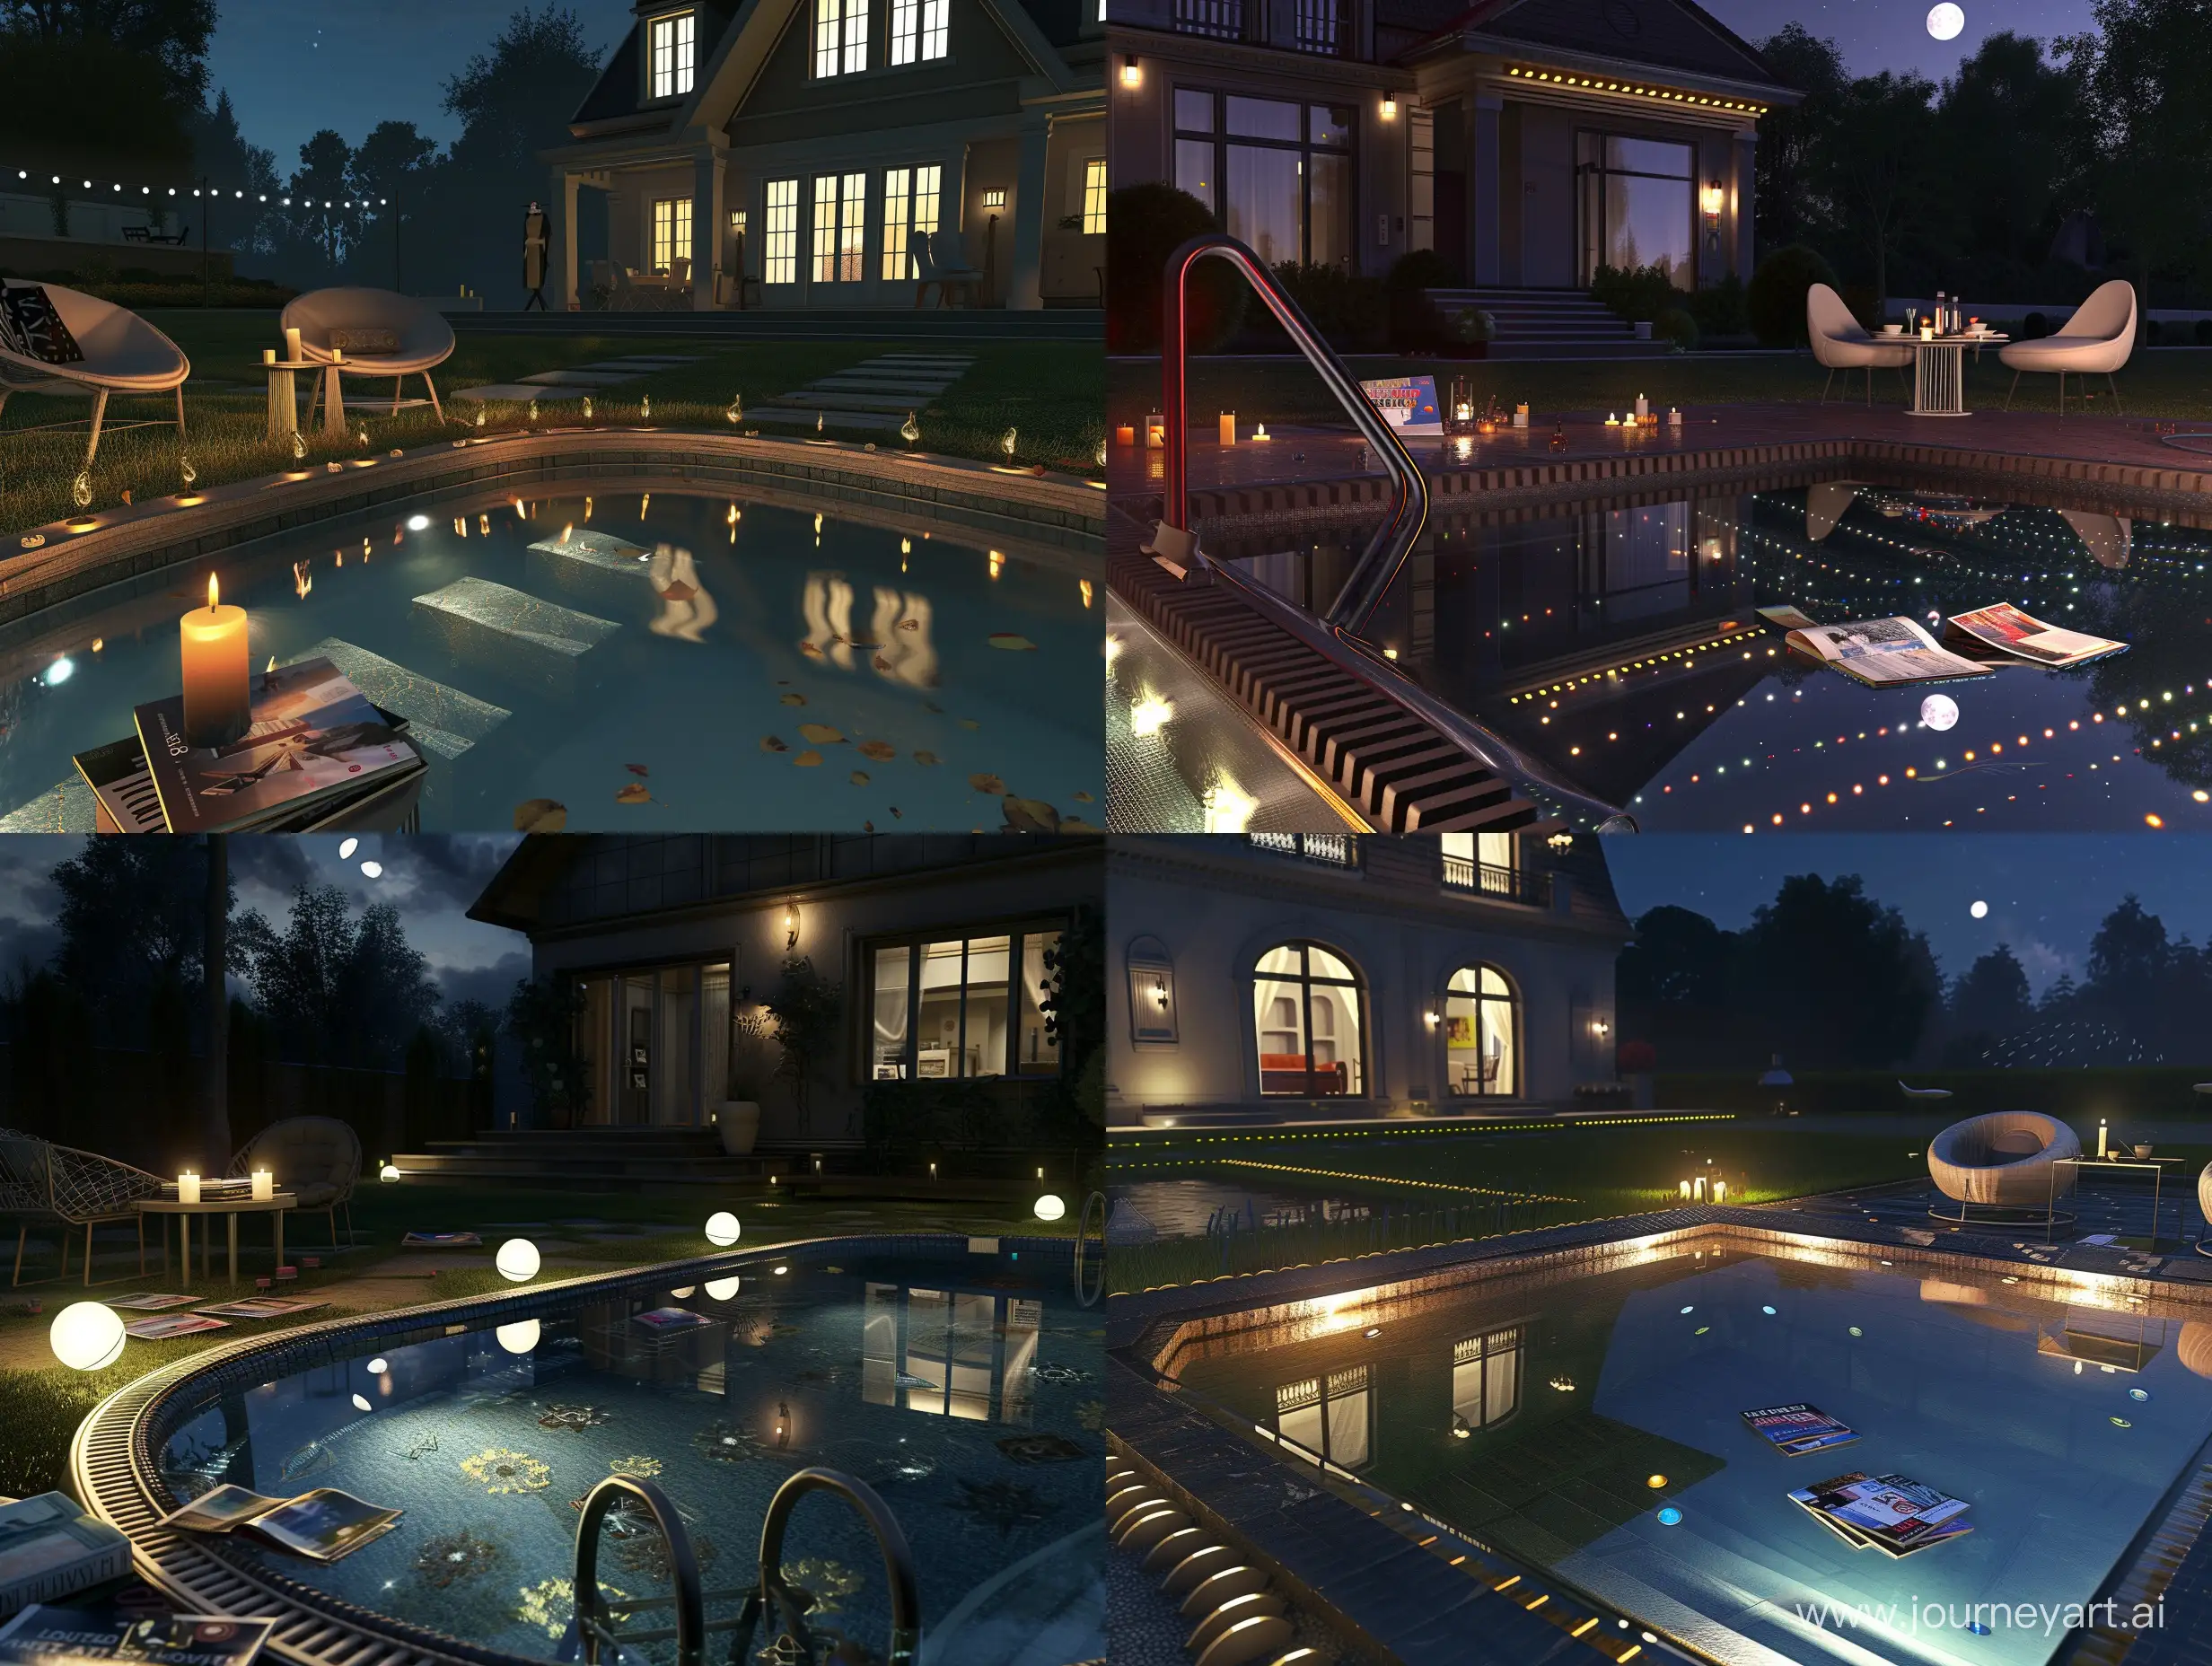 beautiful american large house at night. a backyard a small swimming pool, with beautiful edging, small rungs, desighned lights reflecting in the transparent water. near is a little table with magazines and candles. there are two design chairs near the table. 8 to ultrarealism, unreal engine, clear objects, beautiful nihgt skies with moon, good compose